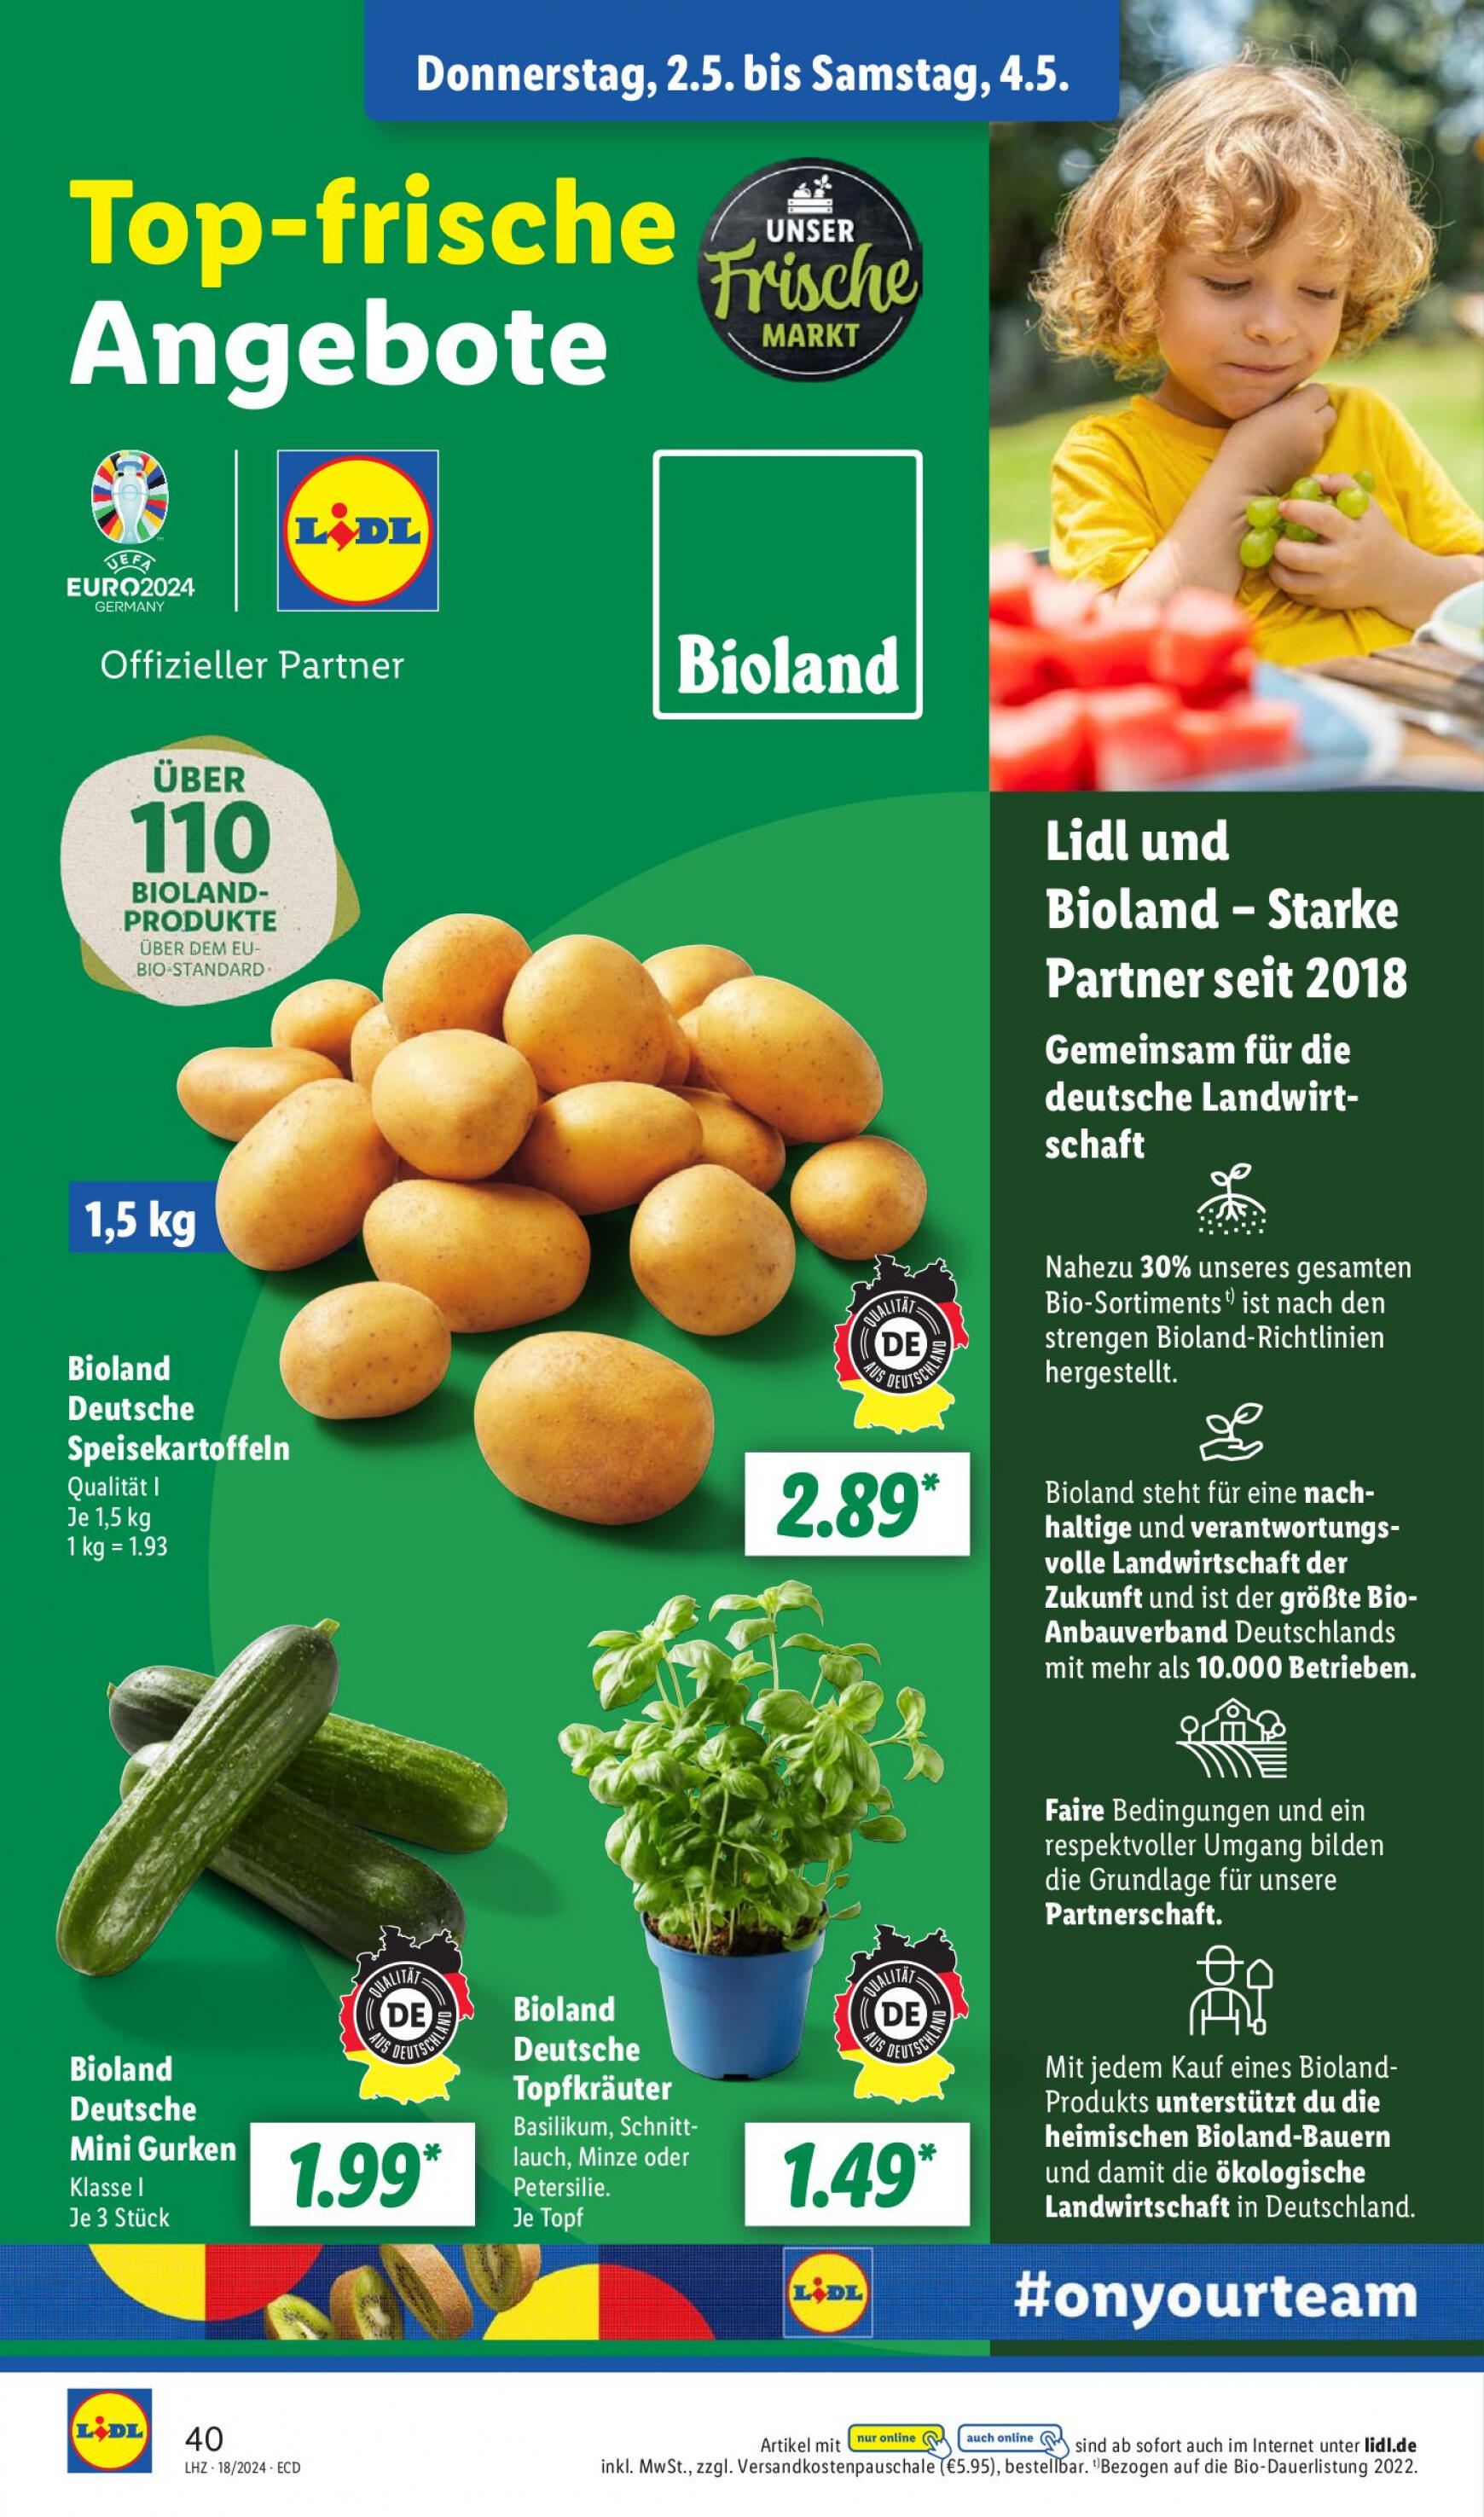 lidl - Flyer Lidl aktuell 29.04. - 04.05. - page: 50